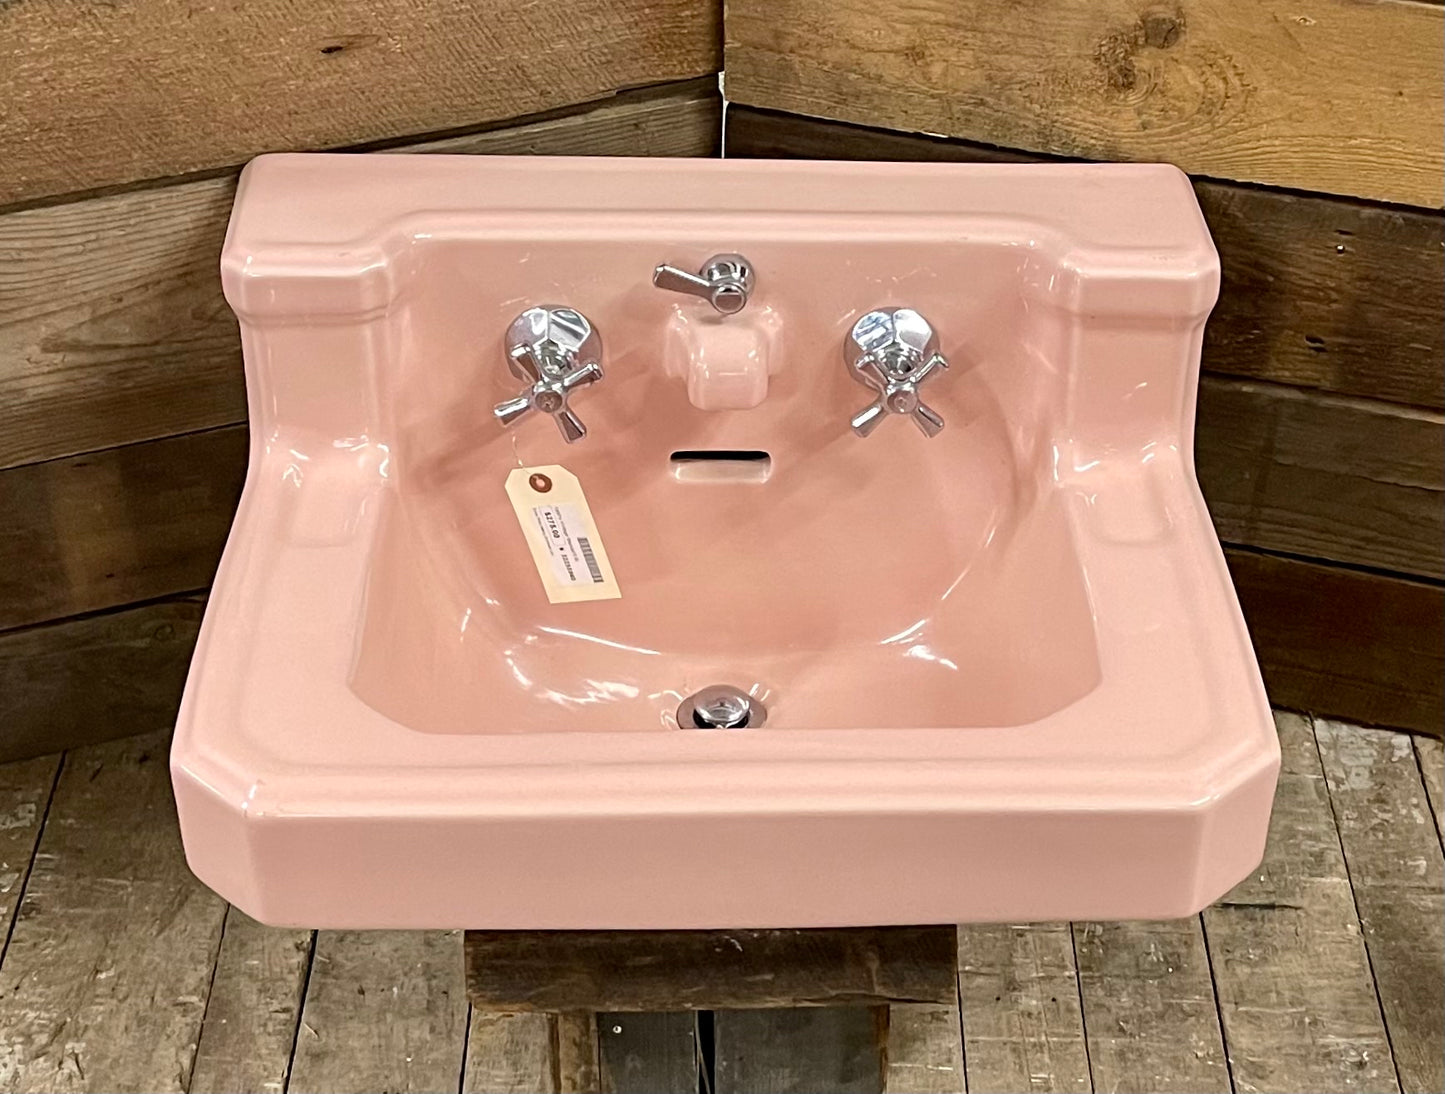 1950s Standard Wall Mount Sink with Legs